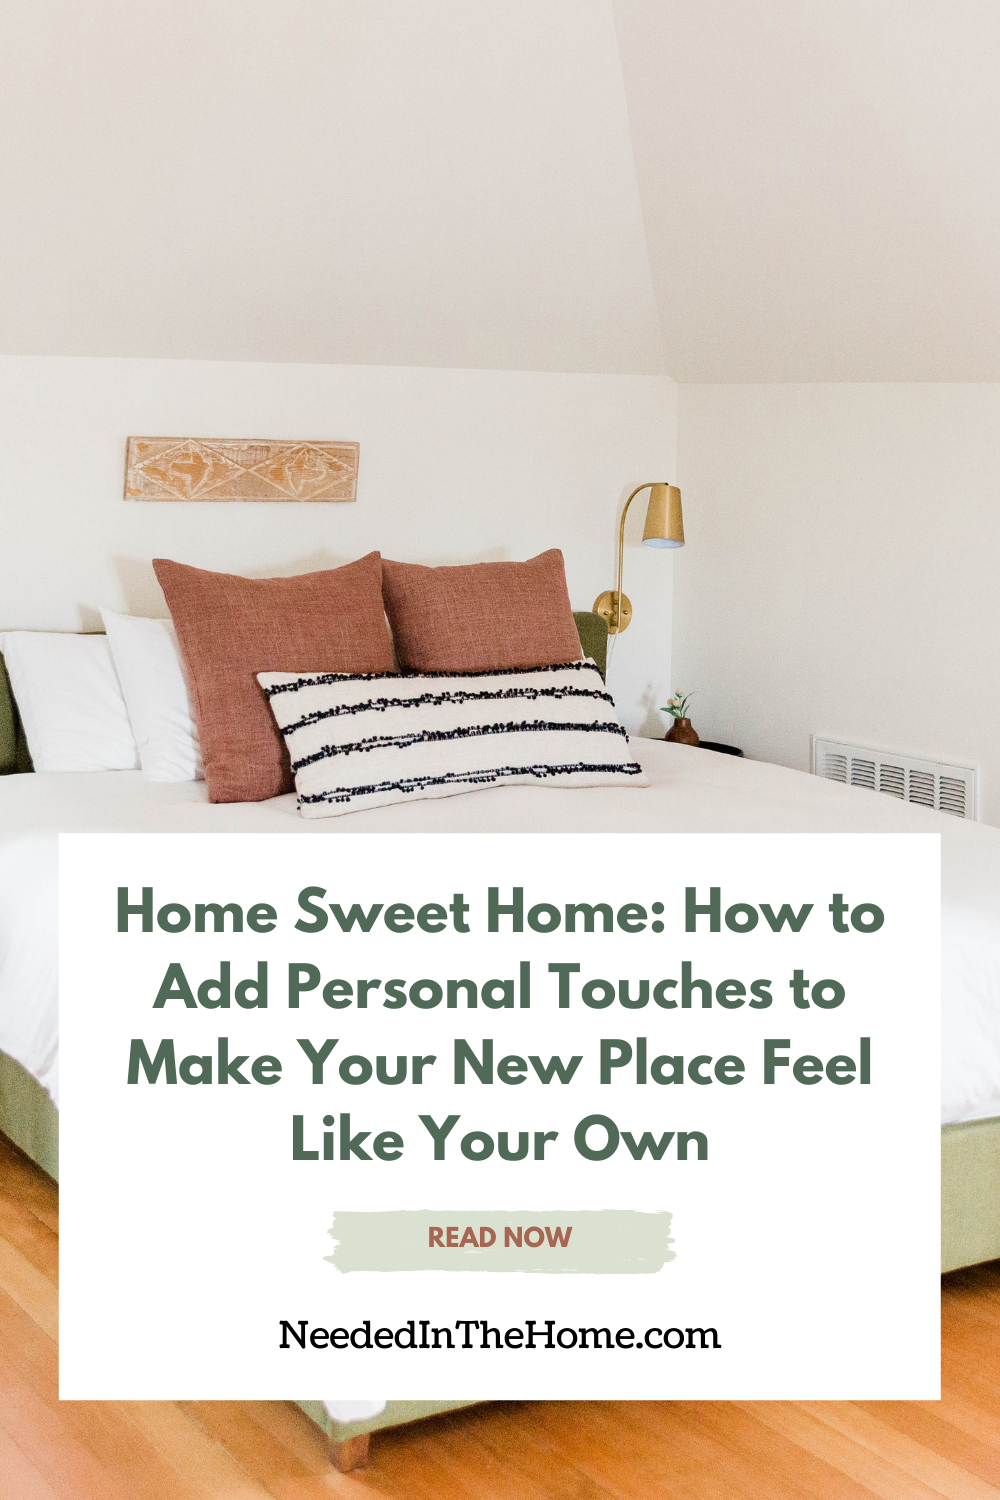 pinterest-pin-description home sweet home how to add personal touches to make your new place feel like your own read now pillows on bed with minimalist wall decor neededinthehome